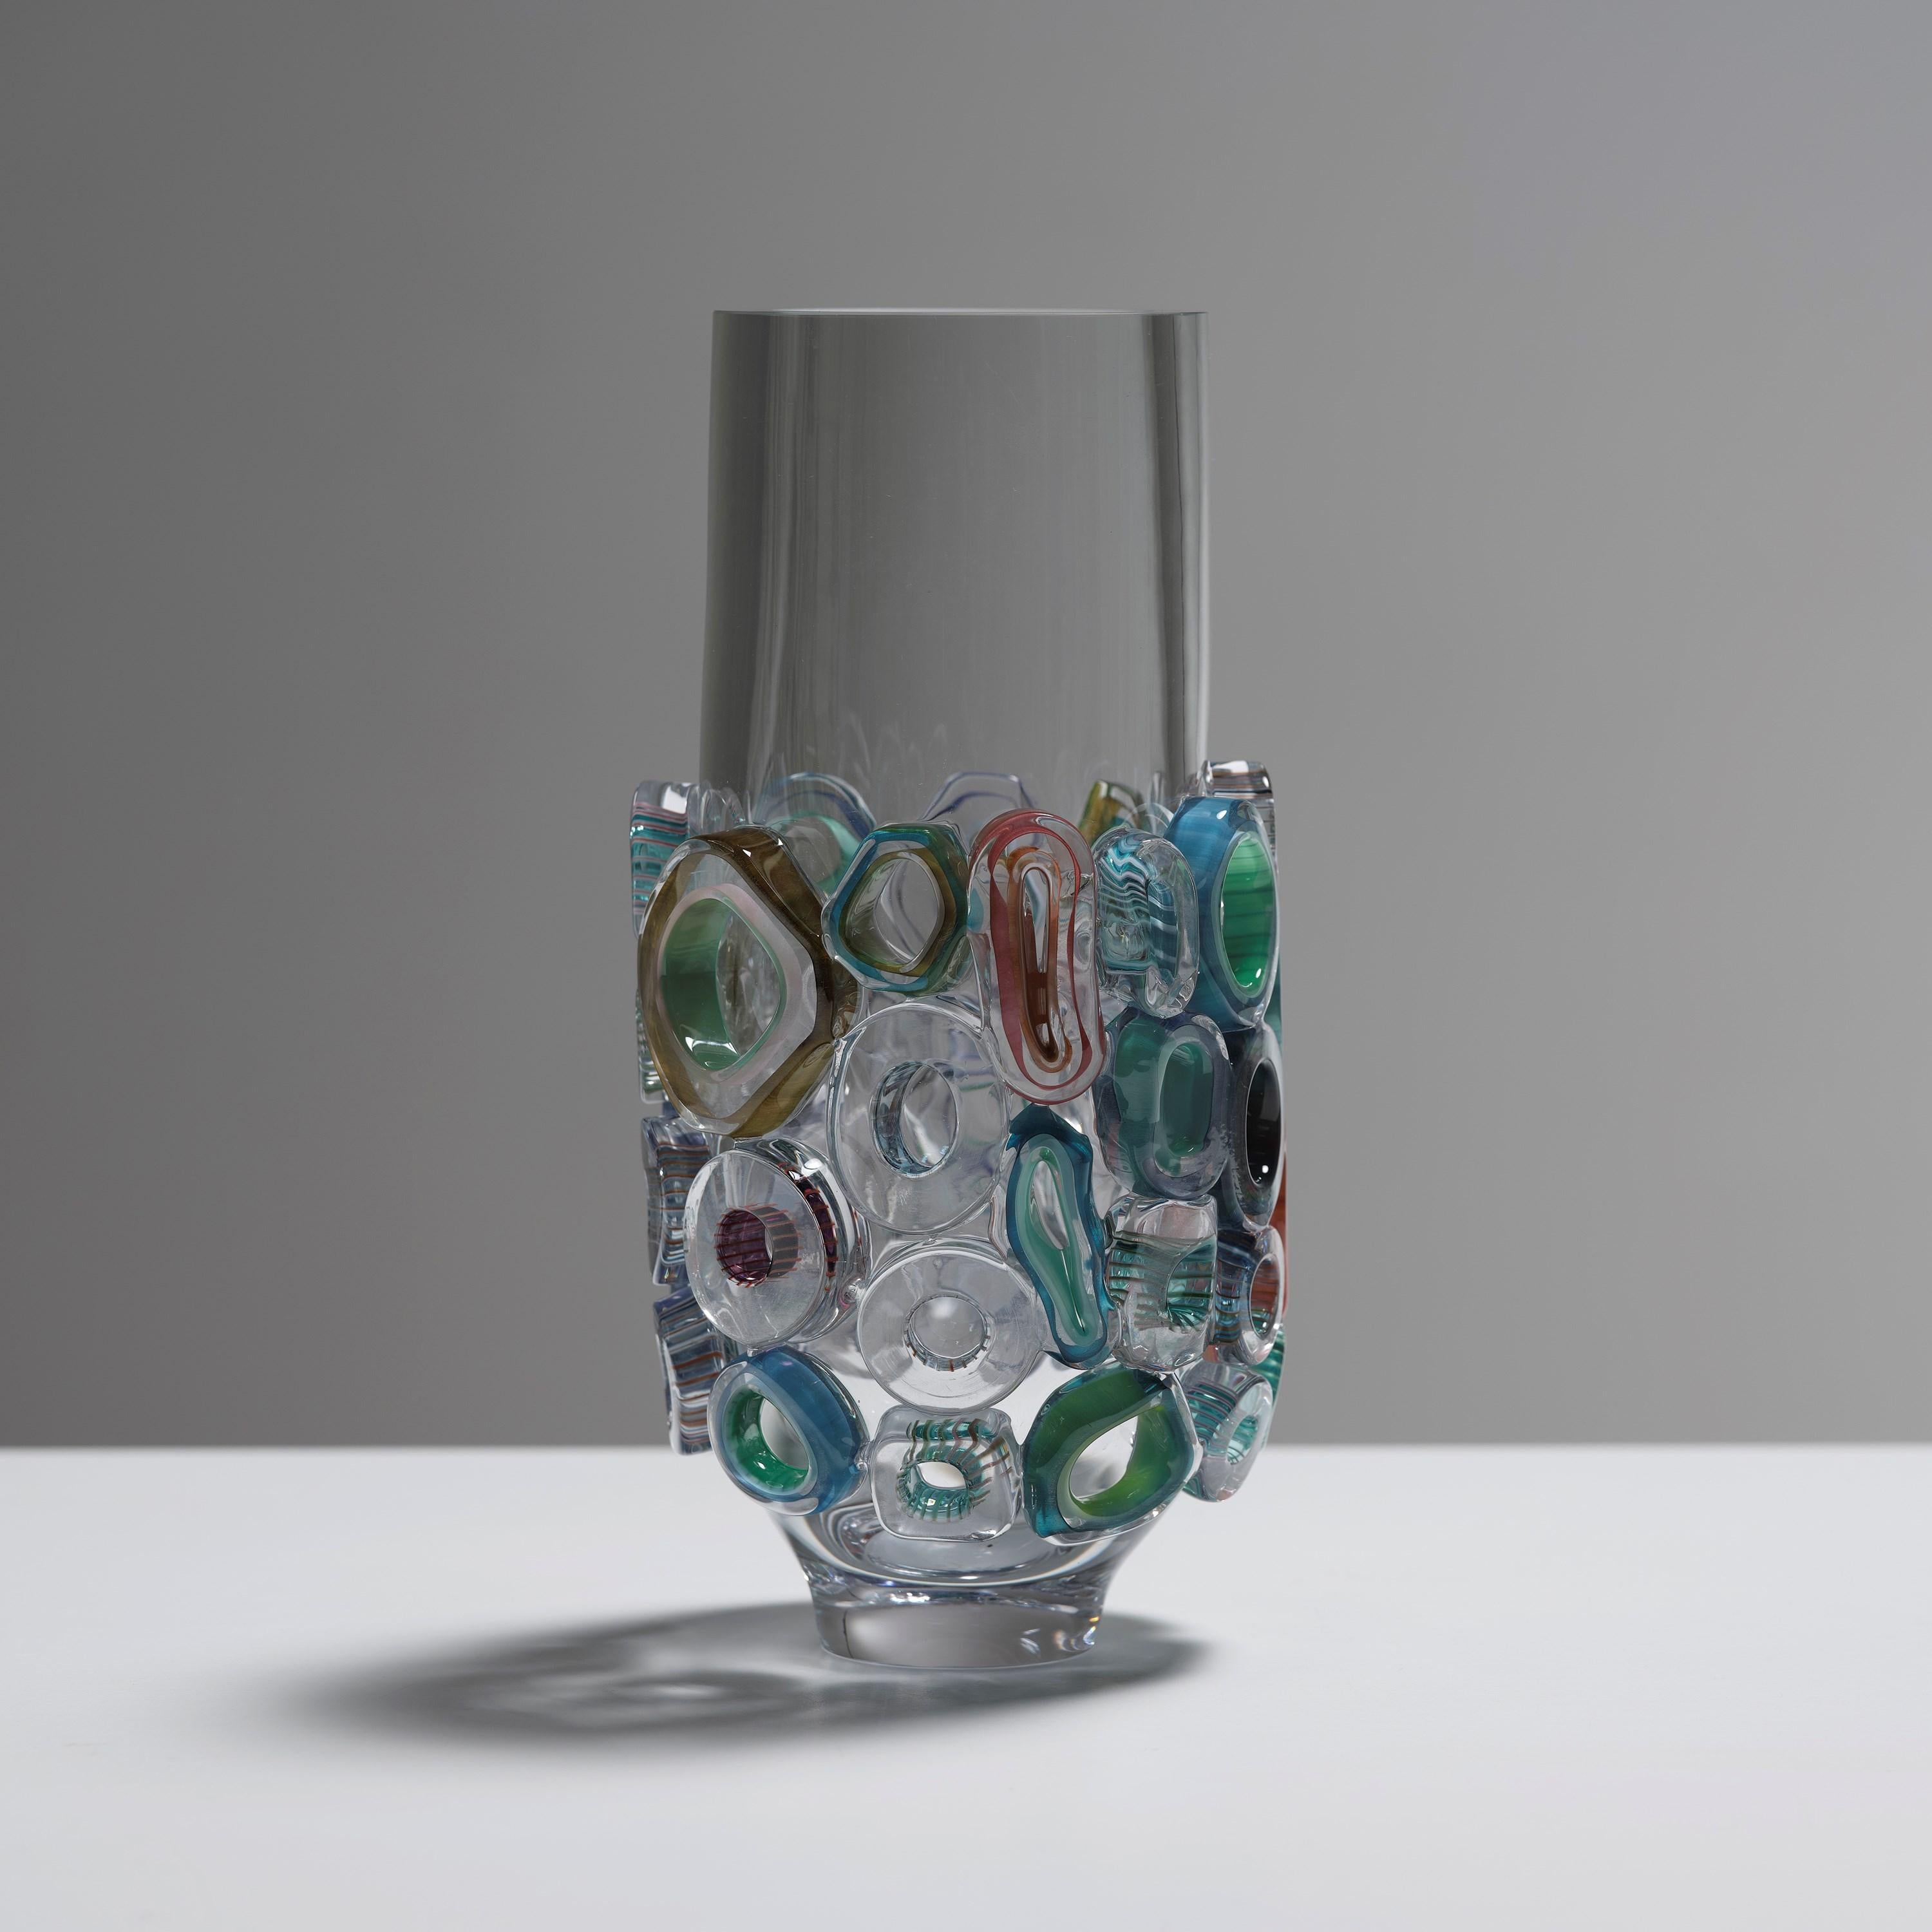 Bright Field Neutral Grey, glass vase with murrini decoration by  Sabine Lintzen In New Condition For Sale In London, GB